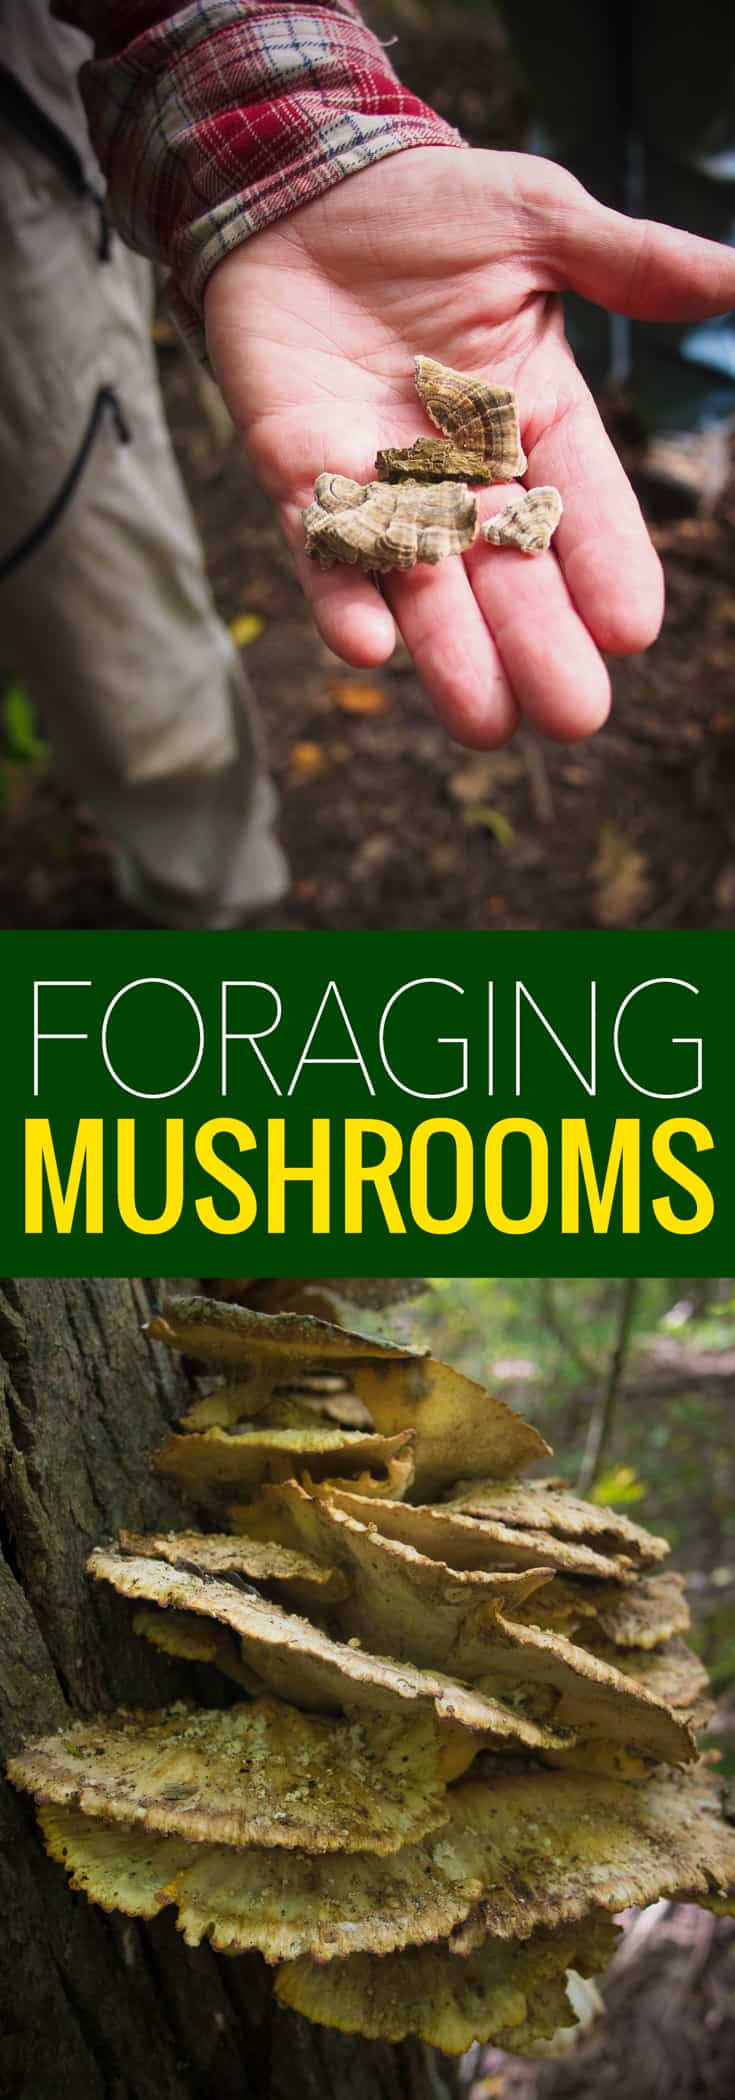 In search of edible mushrooms this fall, discover what you can and can't eat.